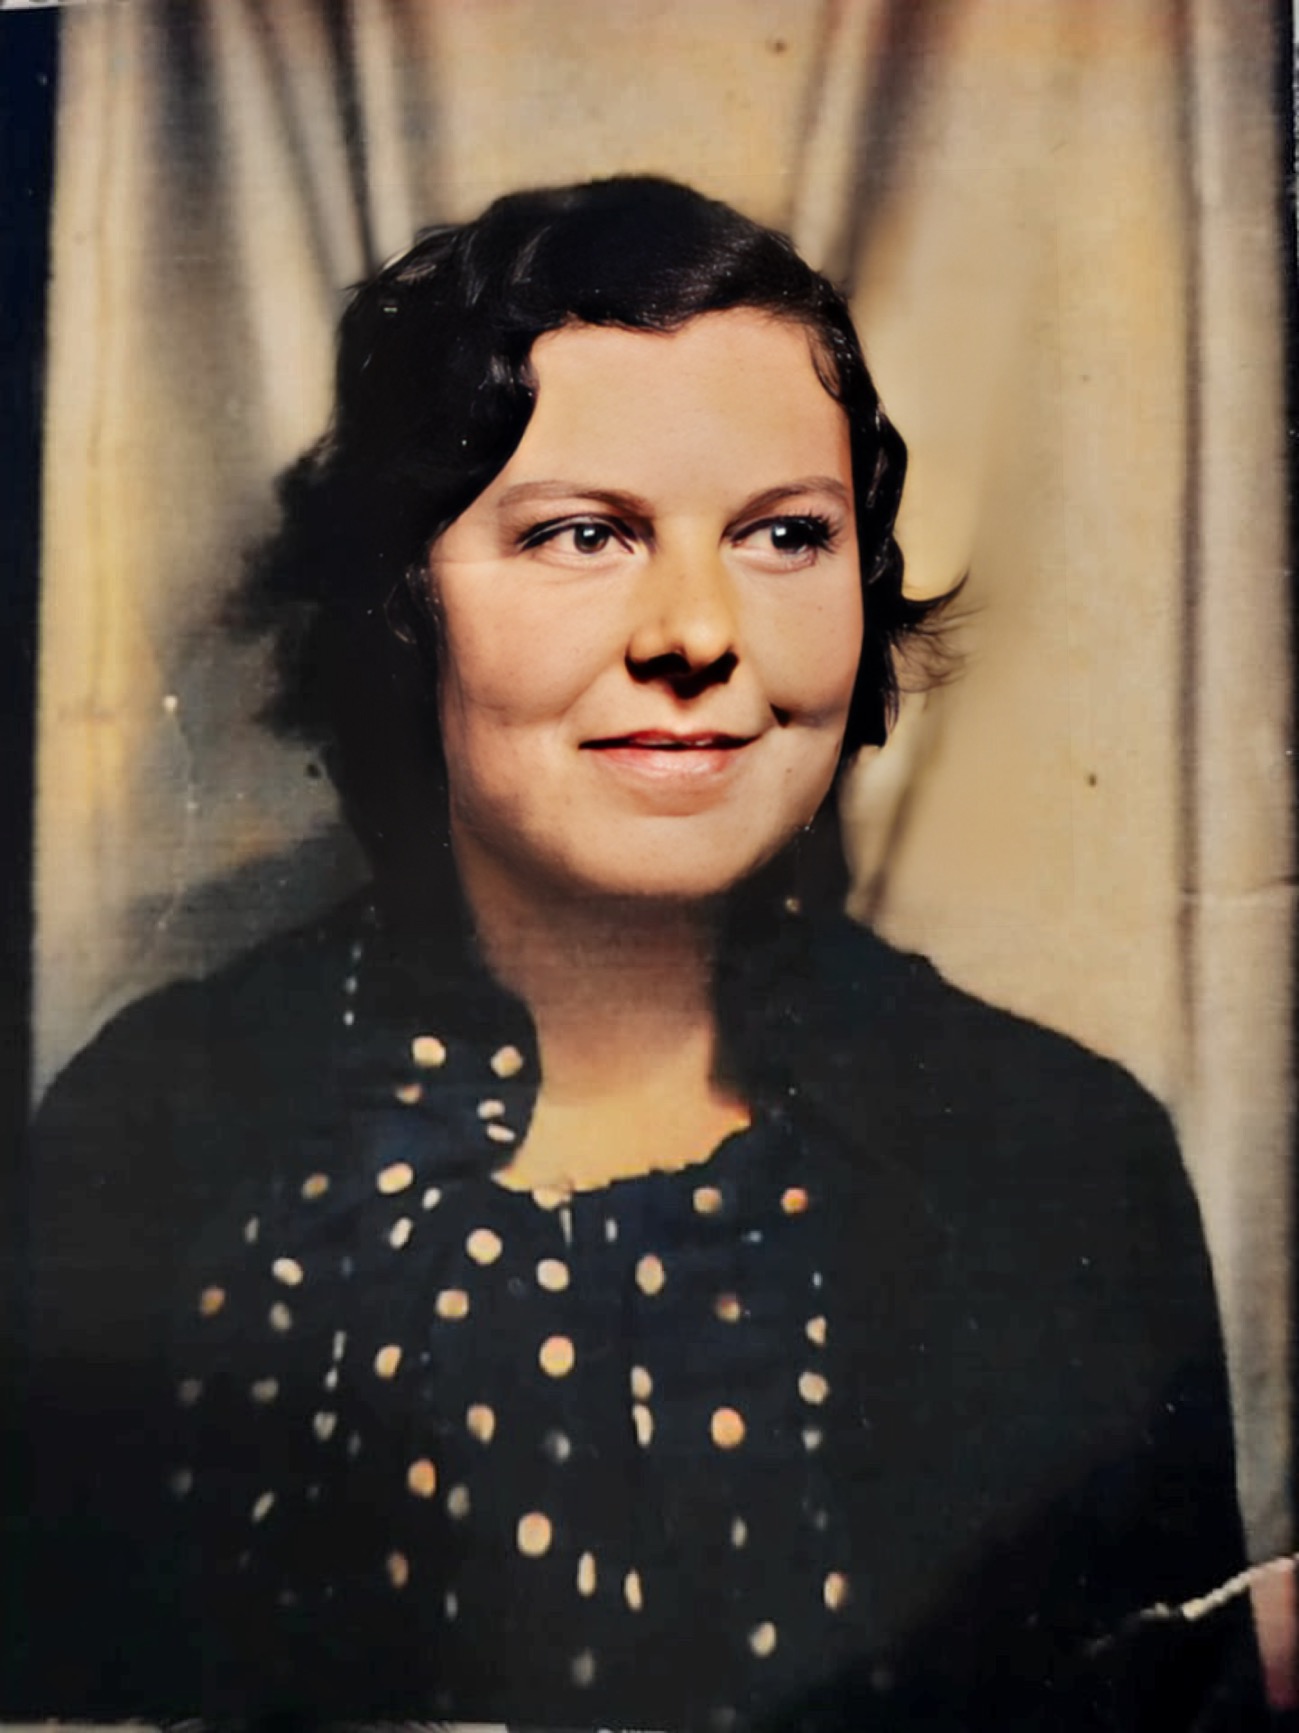 Thid is a photo of my late grandma from arounf 1940’s